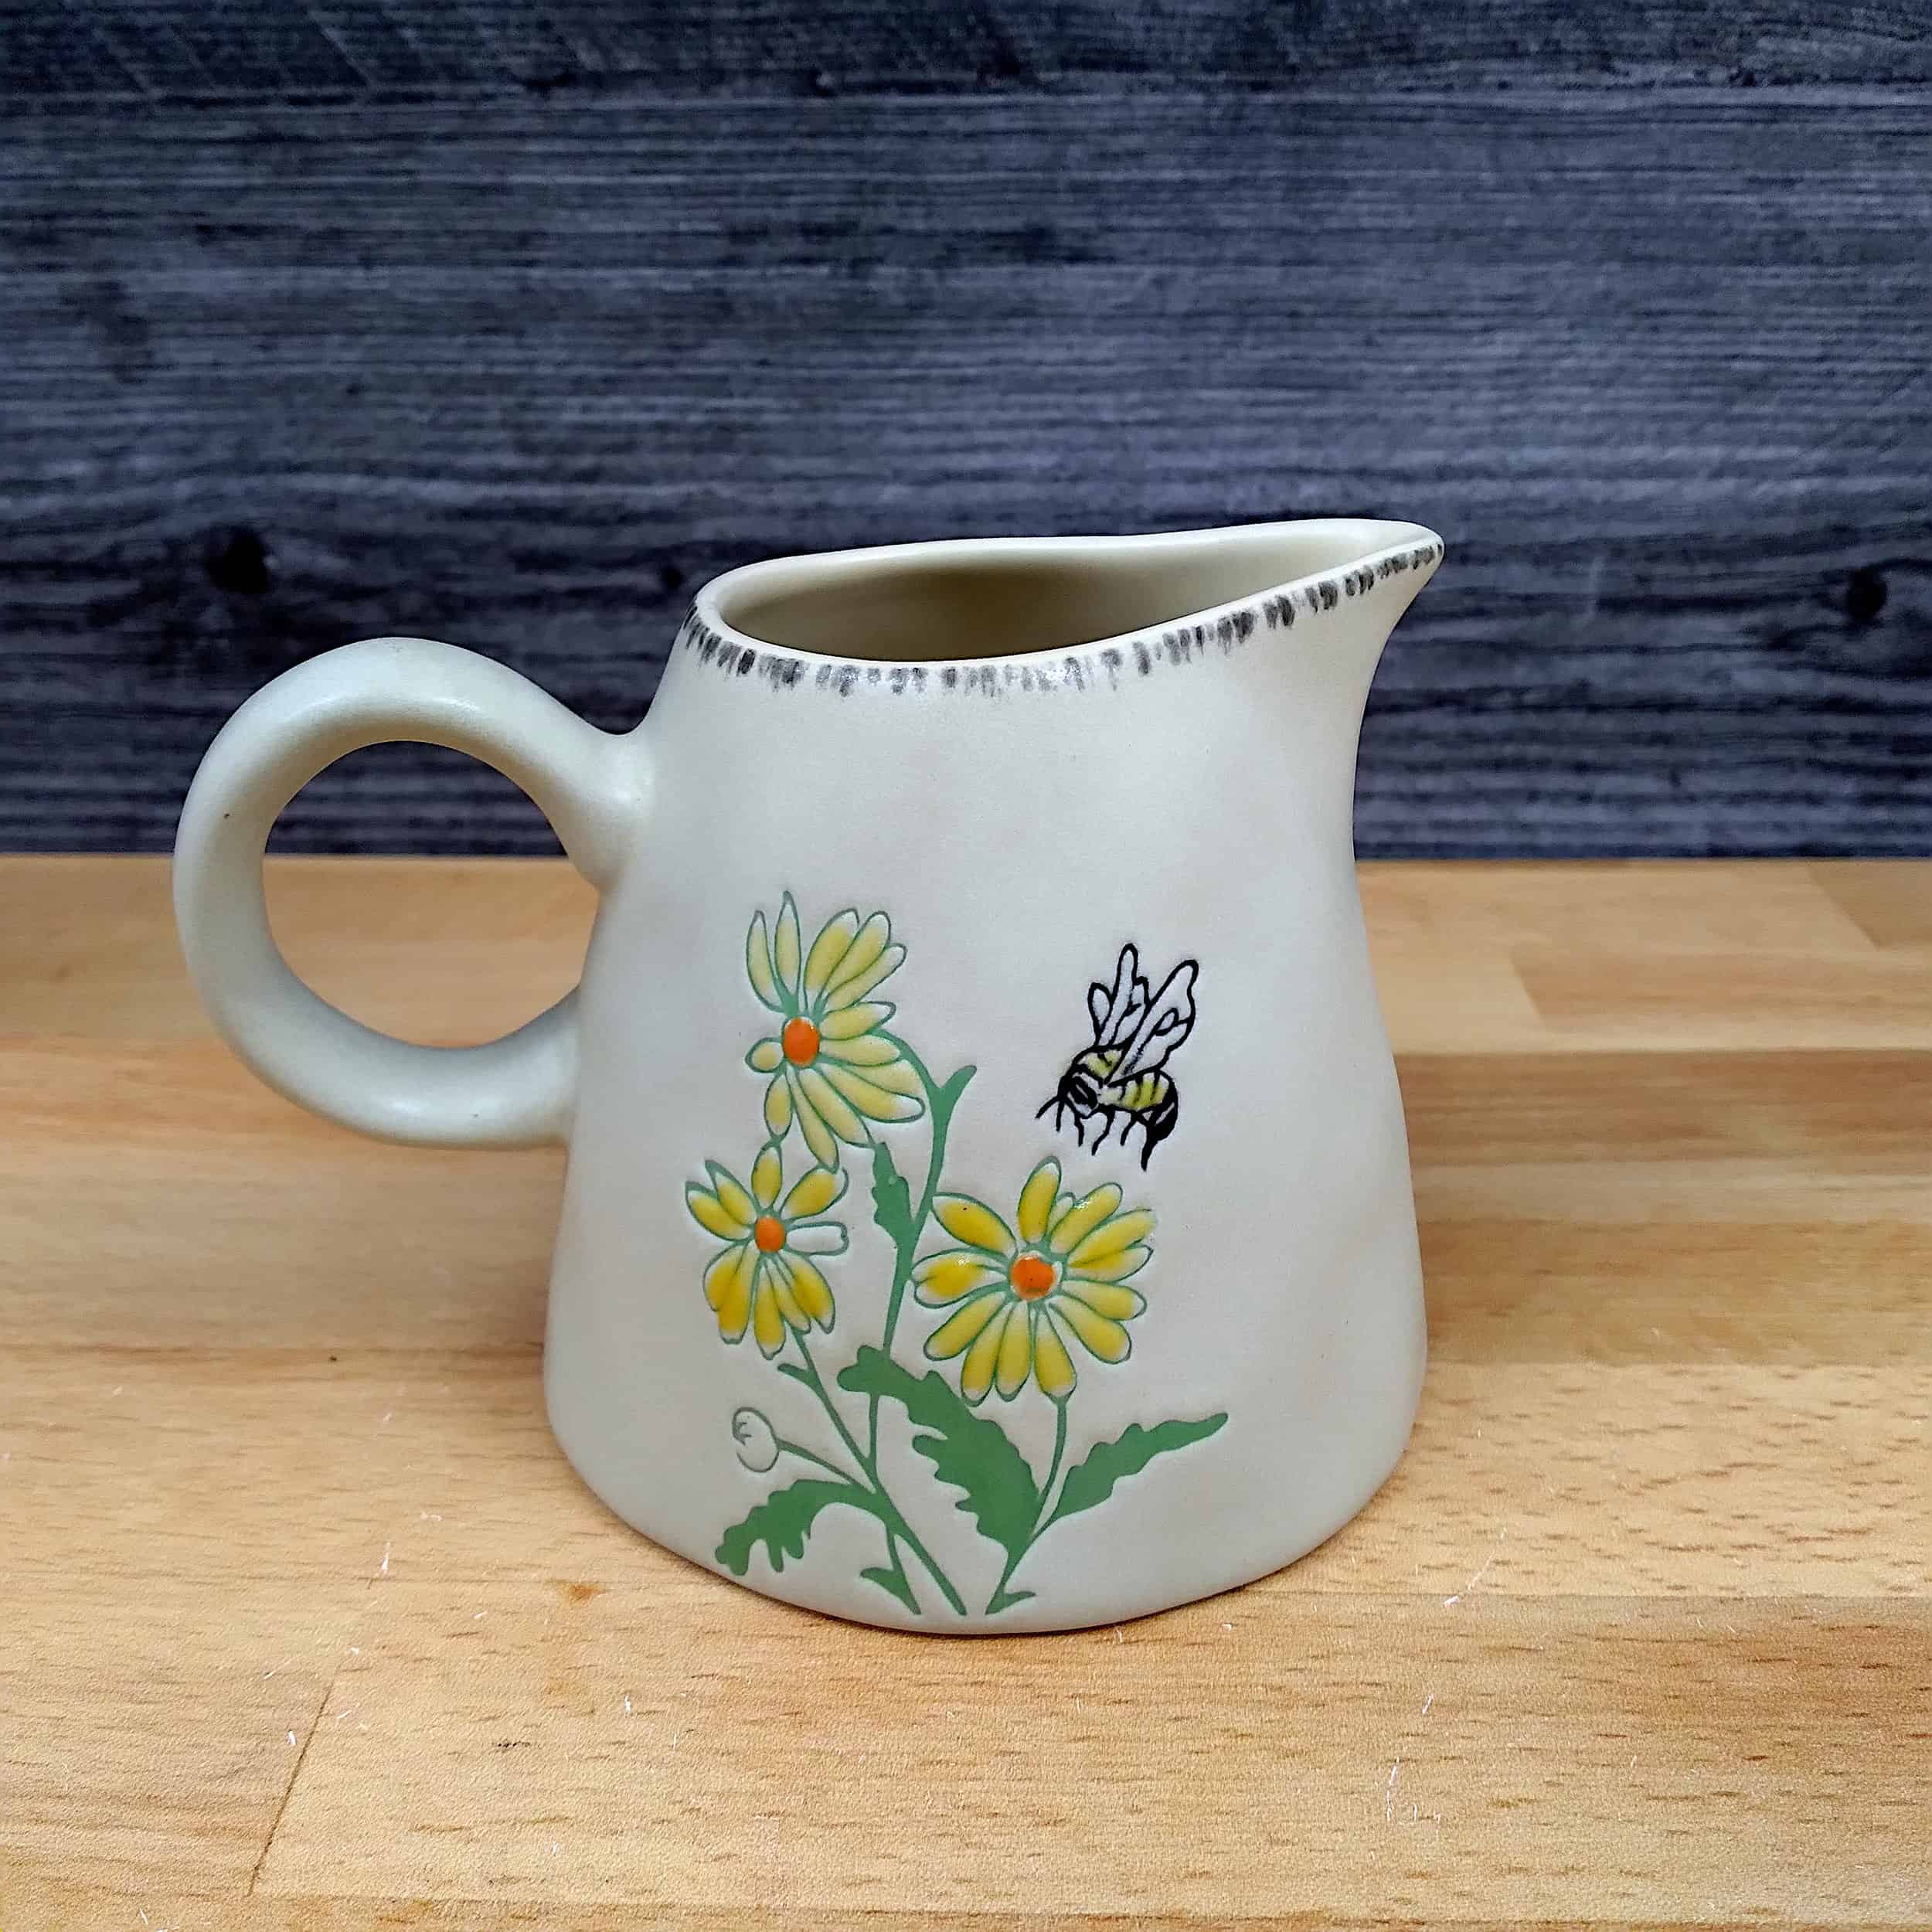 This Bumble Bee and Flower Sugar Bowl and Creamer Set Decorative by Blue Sky is made with love by Premier Homegoods! Shop more unique gift ideas today with Spots Initiatives, the best way to support creators.